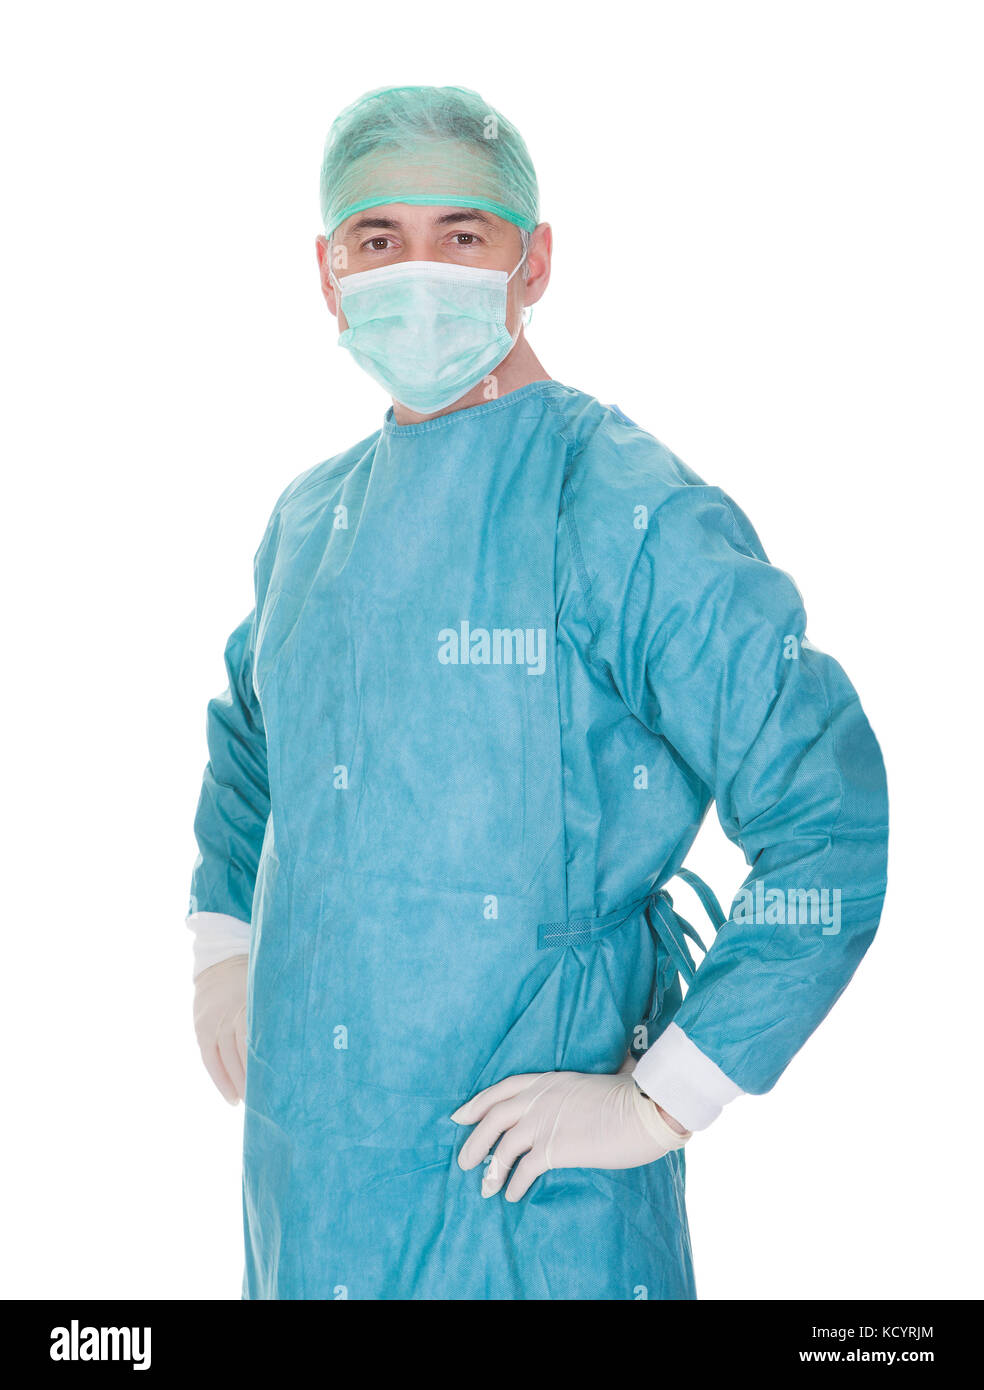 Portrait Of Mature Male Surgeon Isolated Over White Background Stock Photo